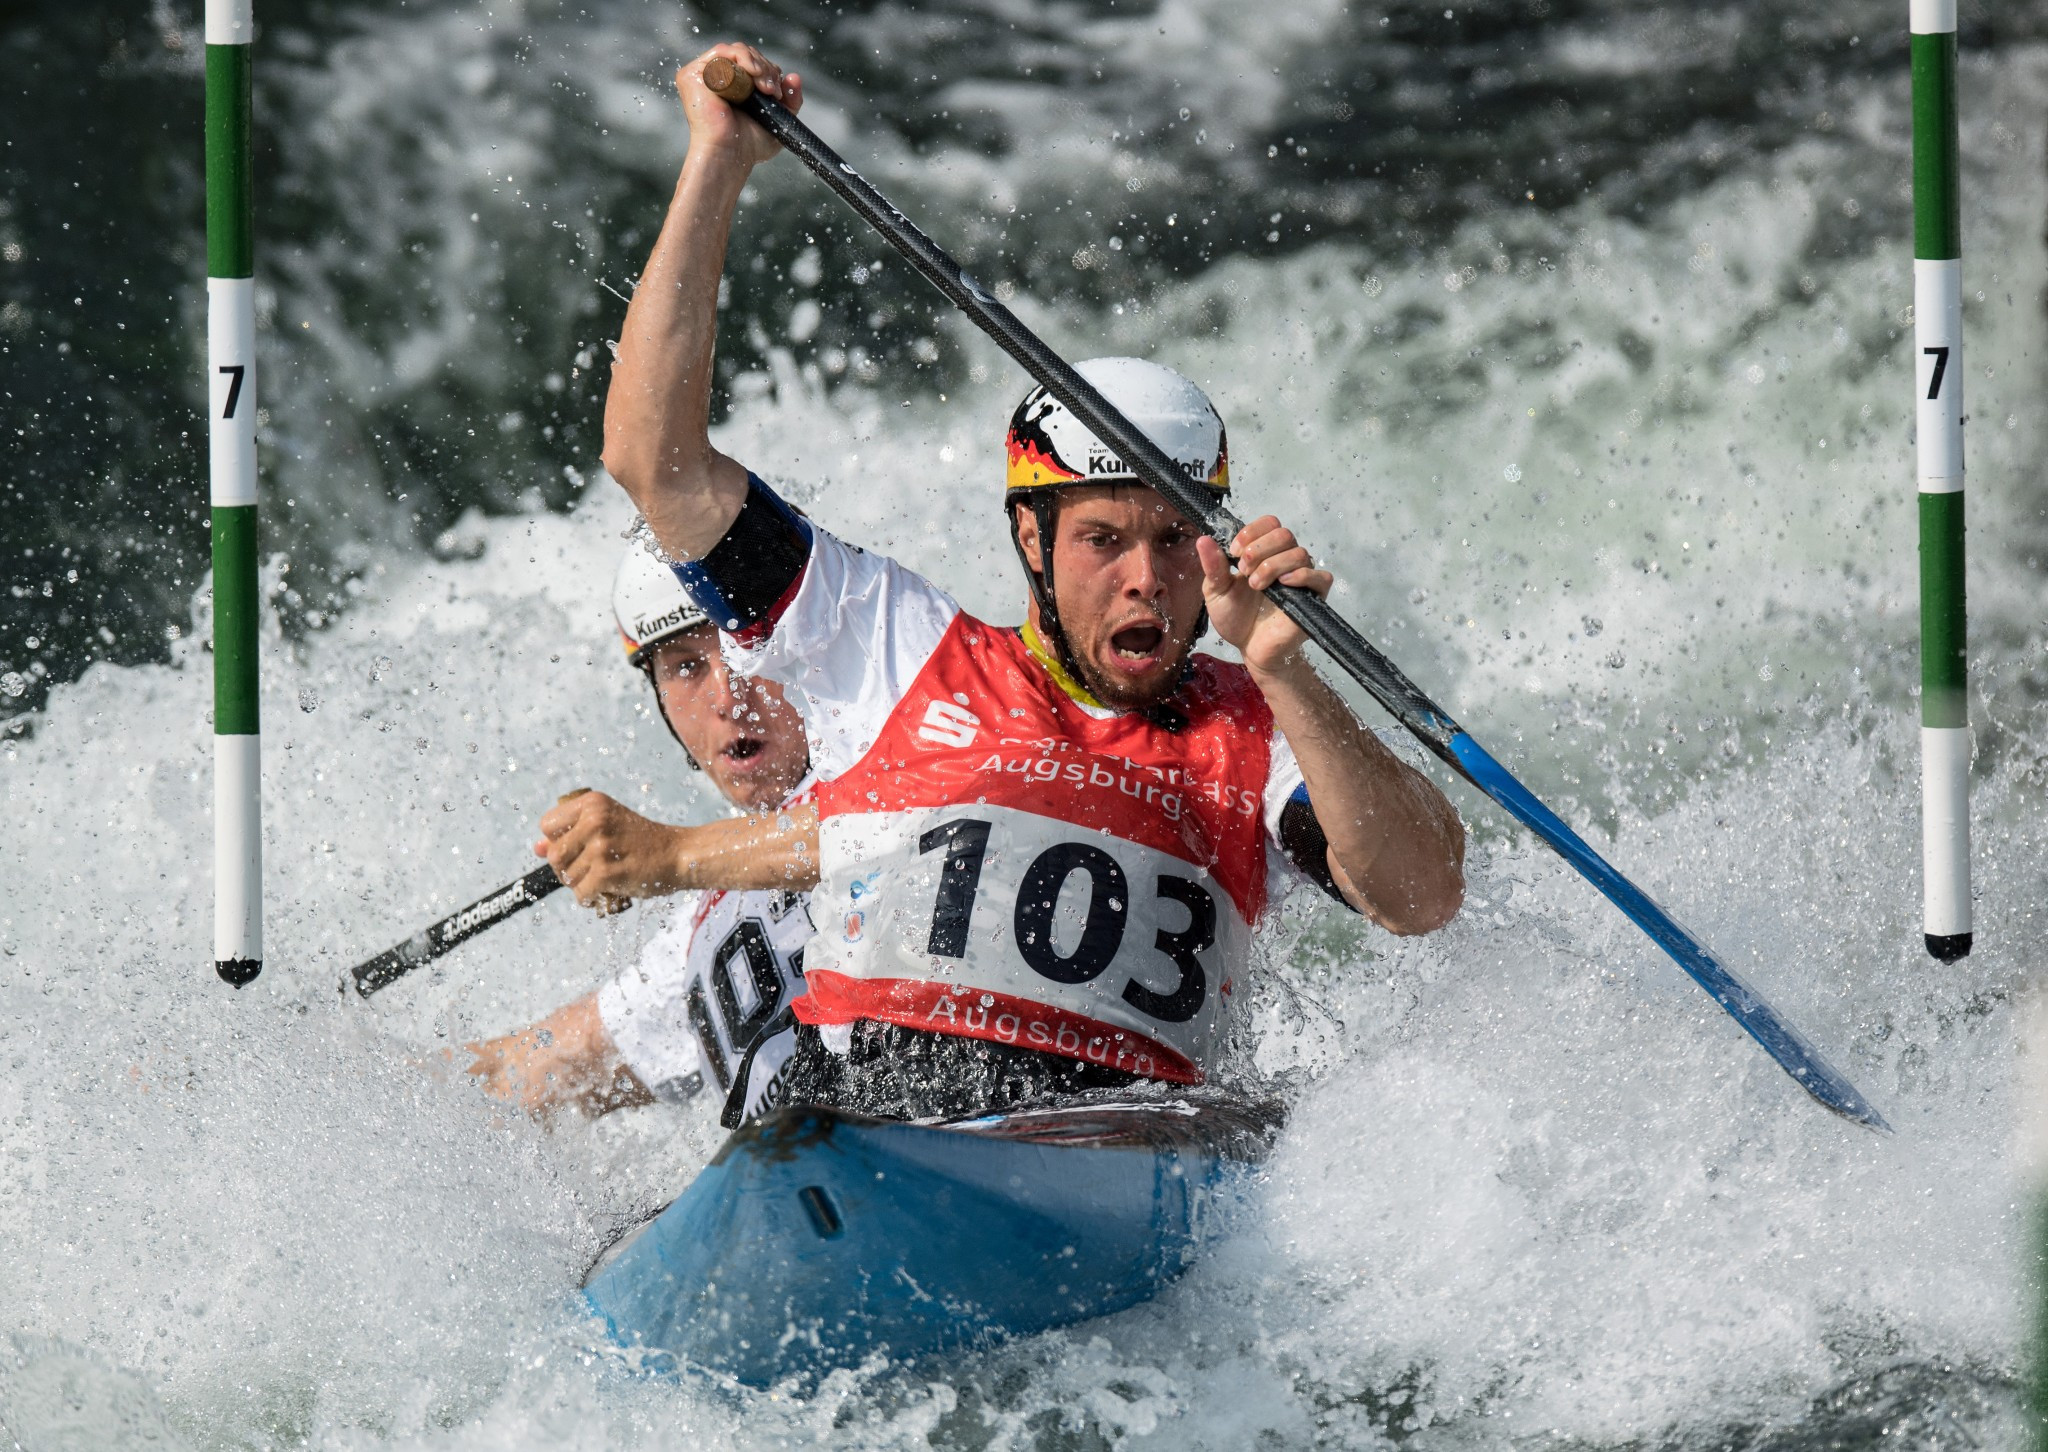 Behling and Becker claim overall title on dramatic day at ICF Canoe Slalom World Cup